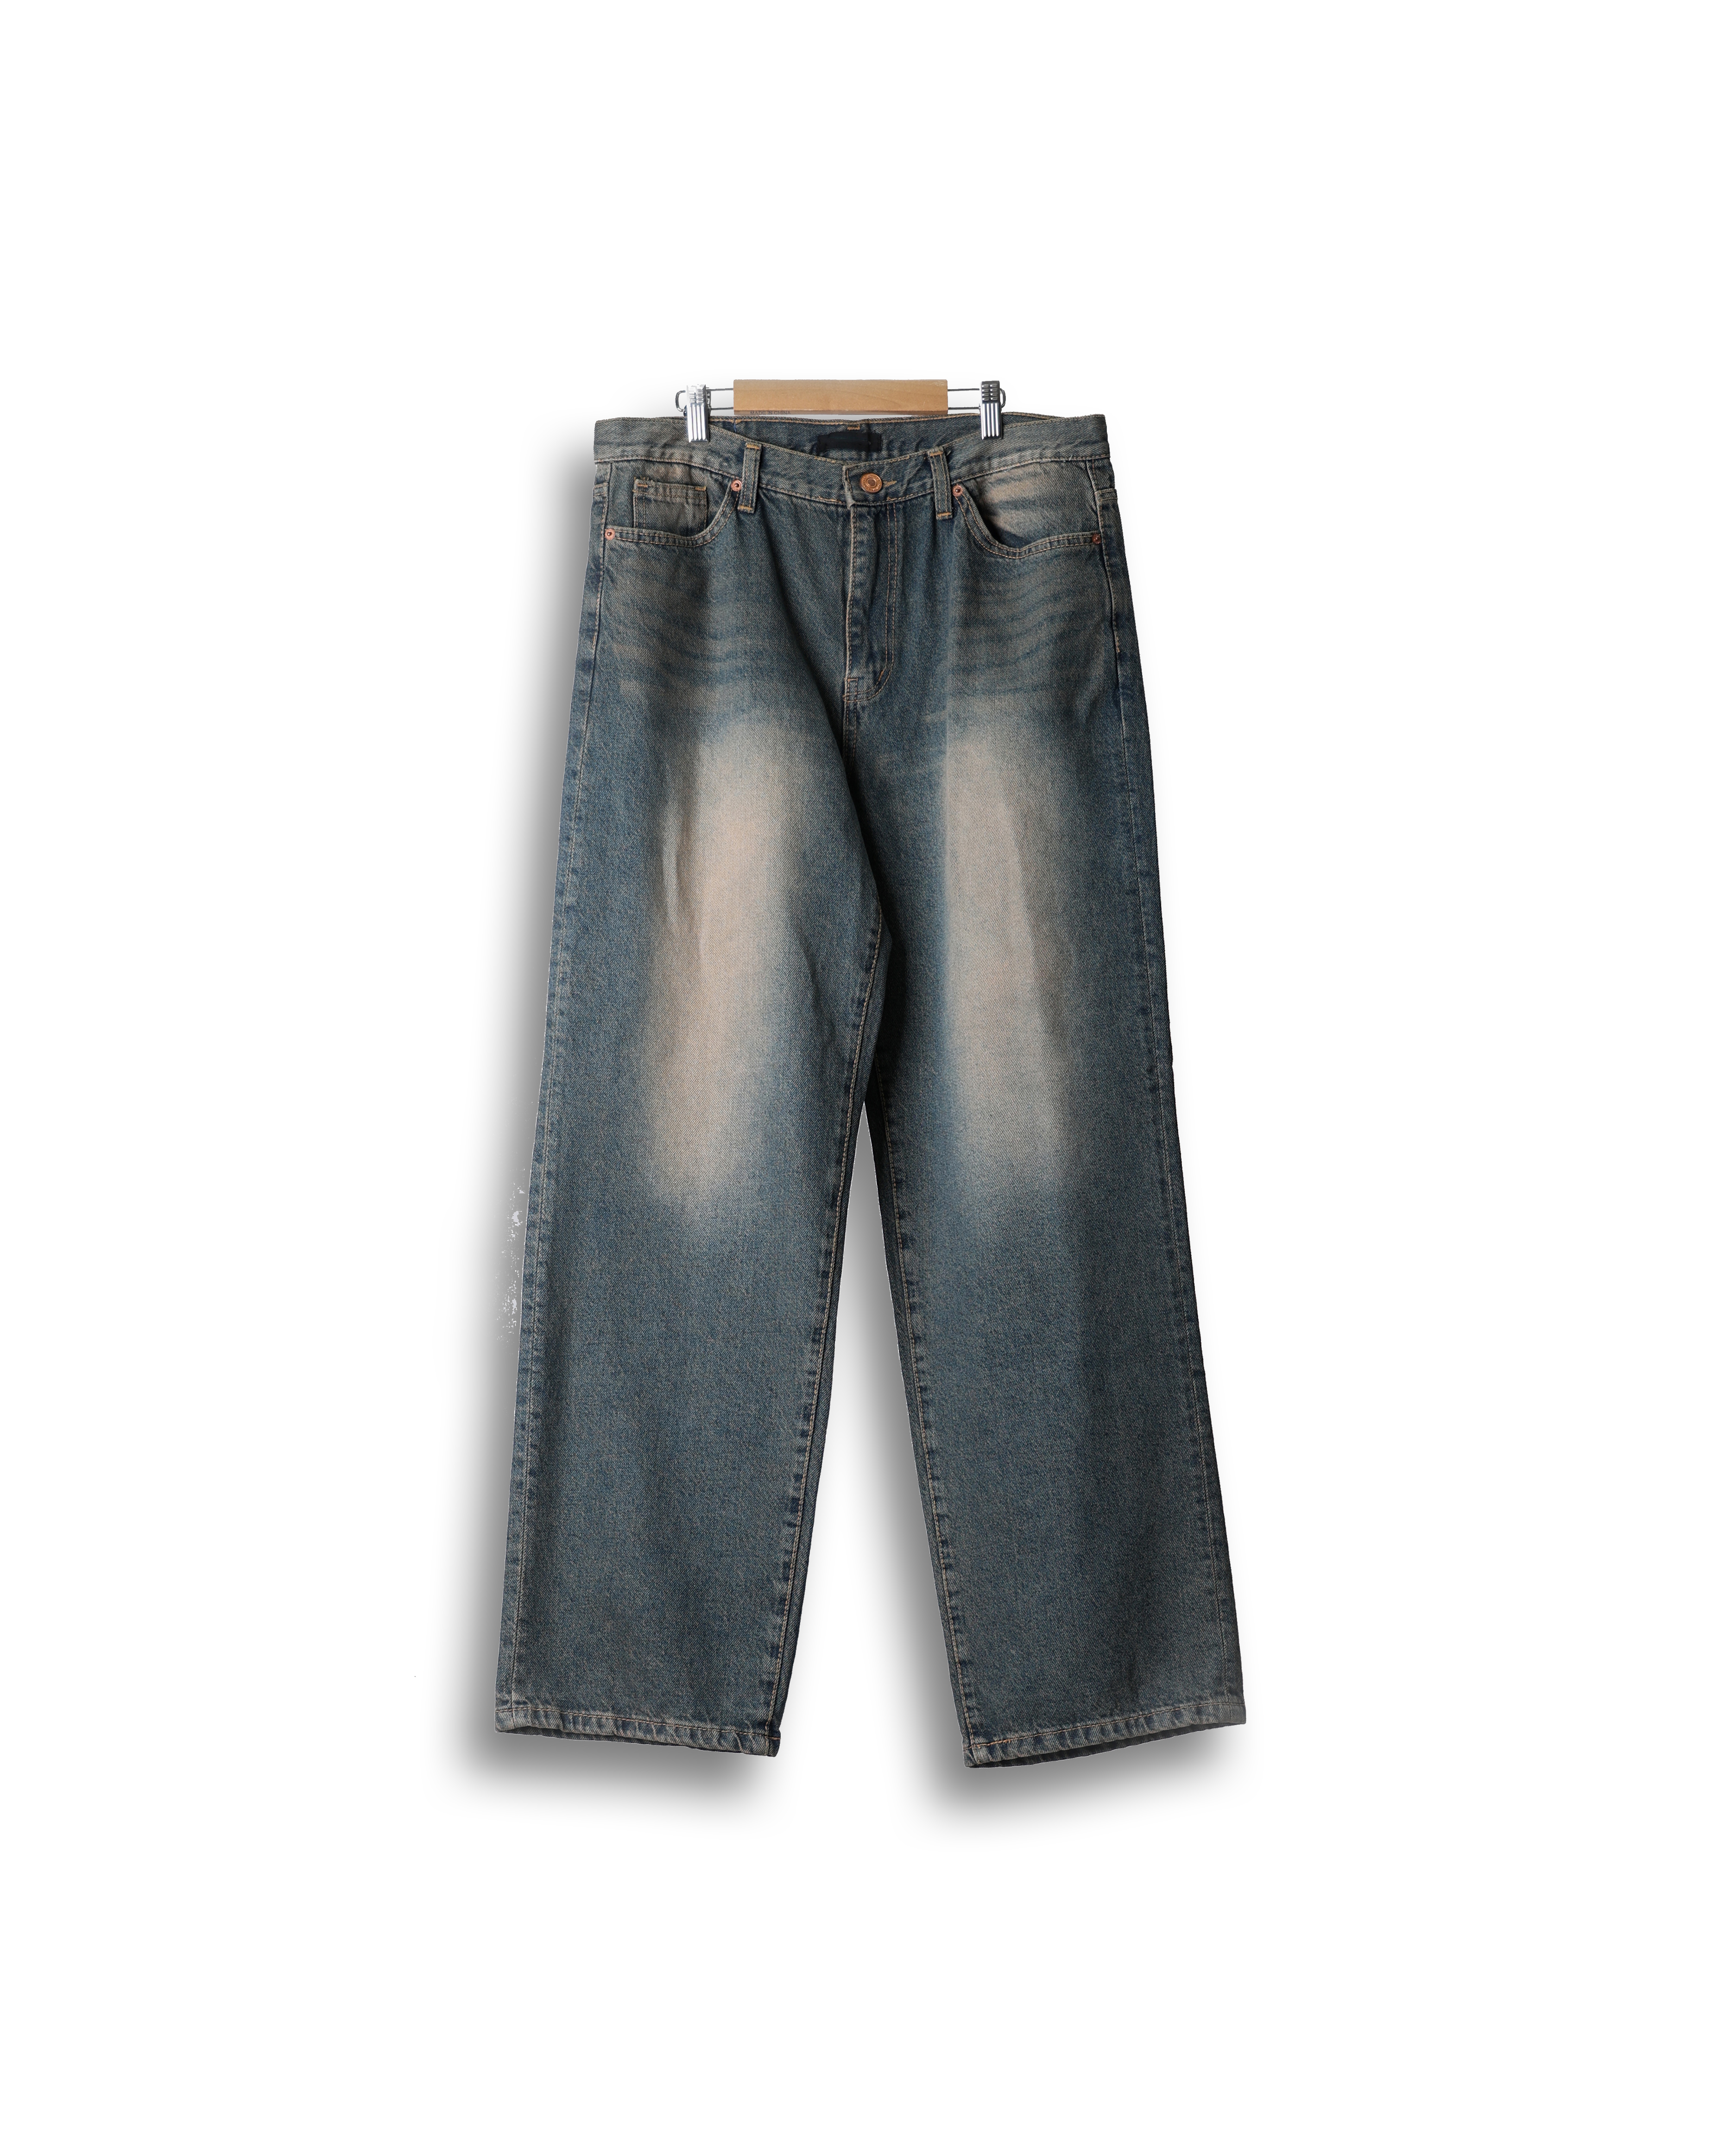 OTHER 239 Washed Dying Wide Denim Pants (Denim)